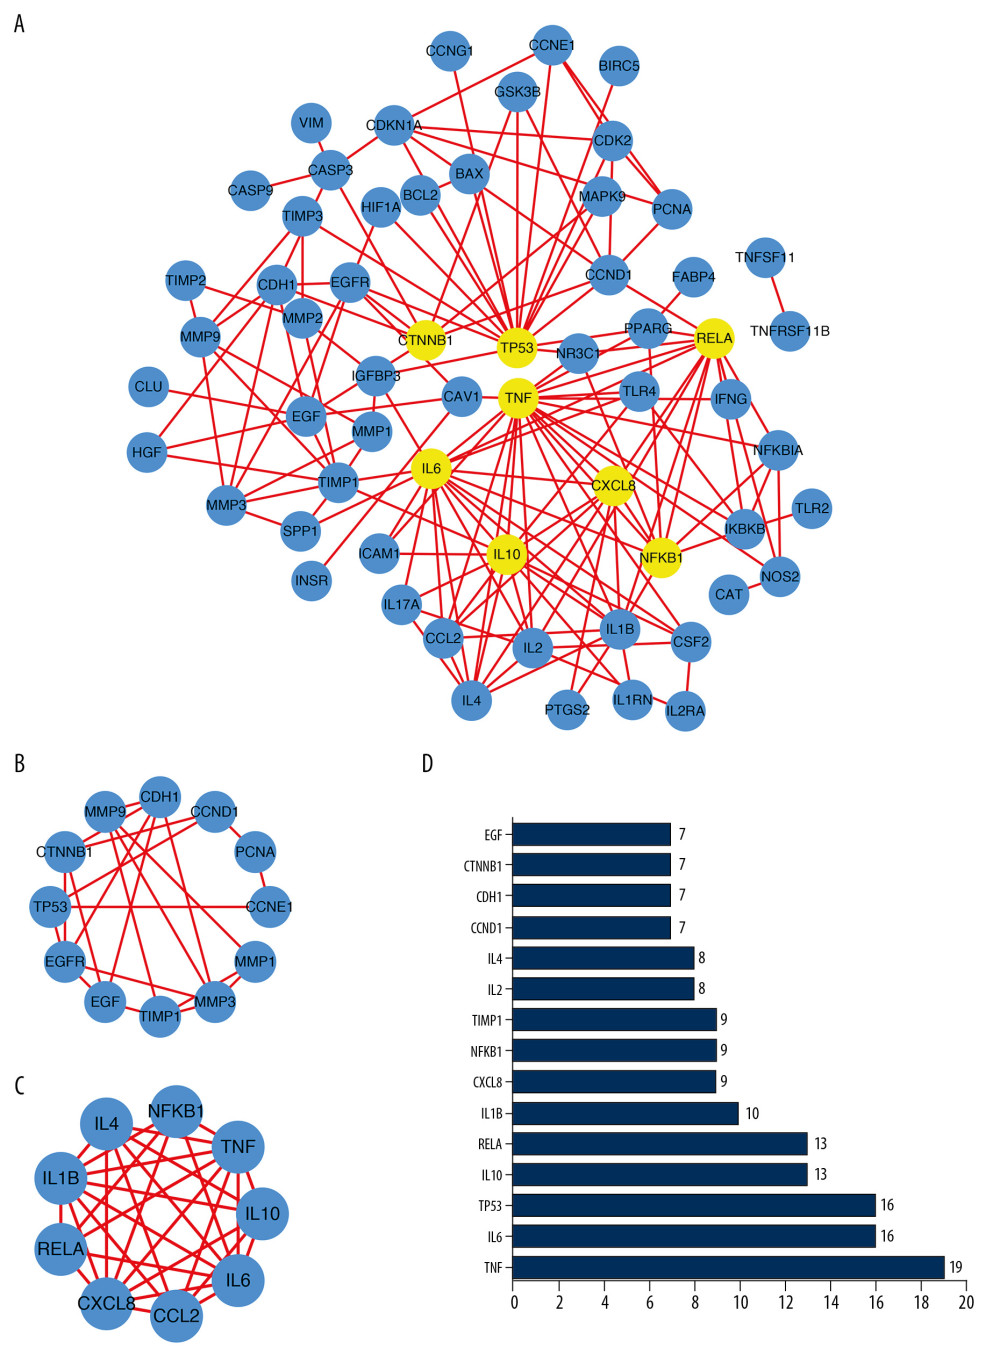 (A) Protein–protein interaction (PPI) network of 80 genes associated with SAS and TNBC. The 8 yellow nodes indicate the 8 genes that are connected to the highest number of other genes. (B, C) From the entire PPI network, 2 significant subgroups were identified by MCODE in Cytoscape. (D) The top 15 nodes with the most connections among 80 nodes.